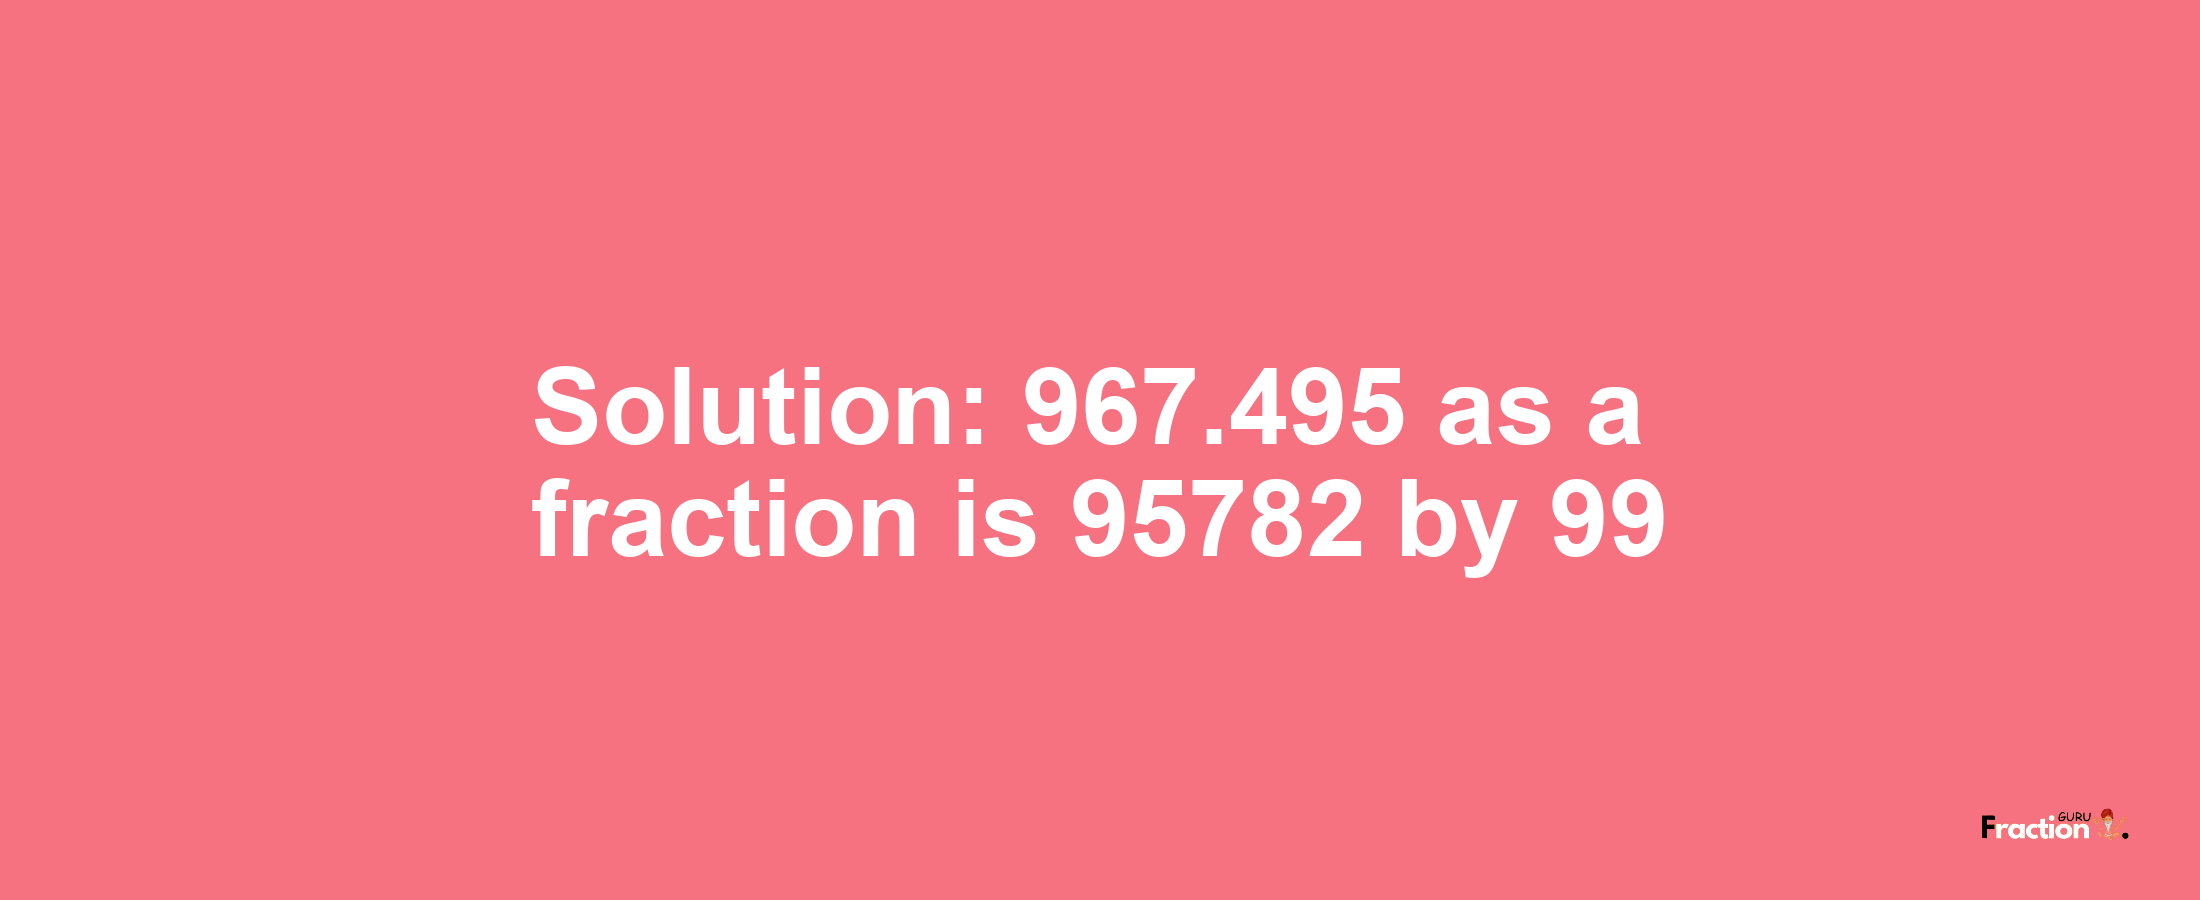 Solution:967.495 as a fraction is 95782/99